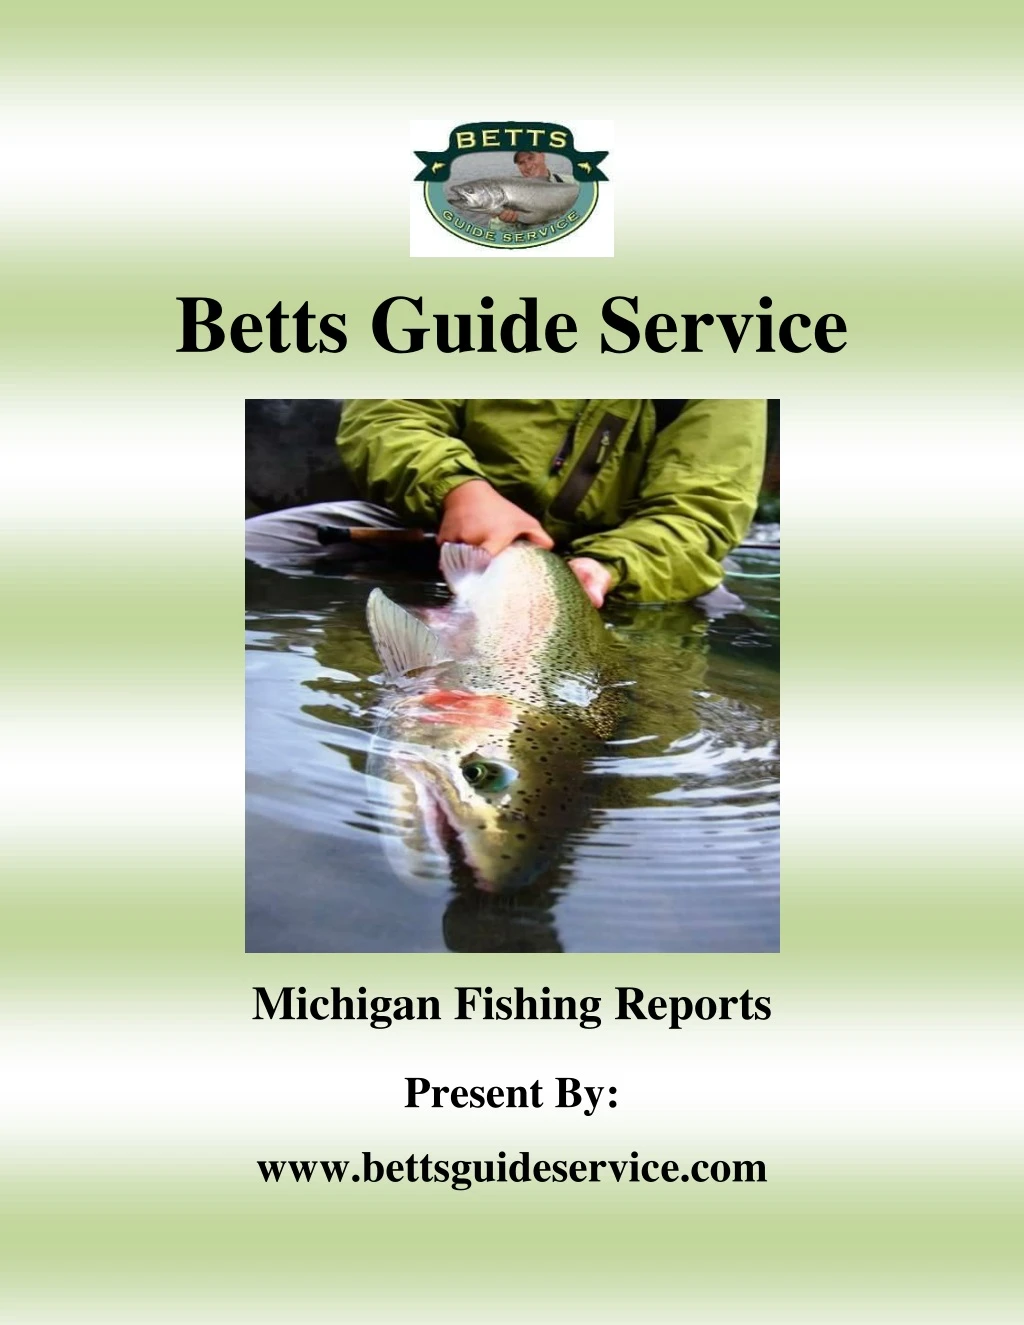 betts guide service